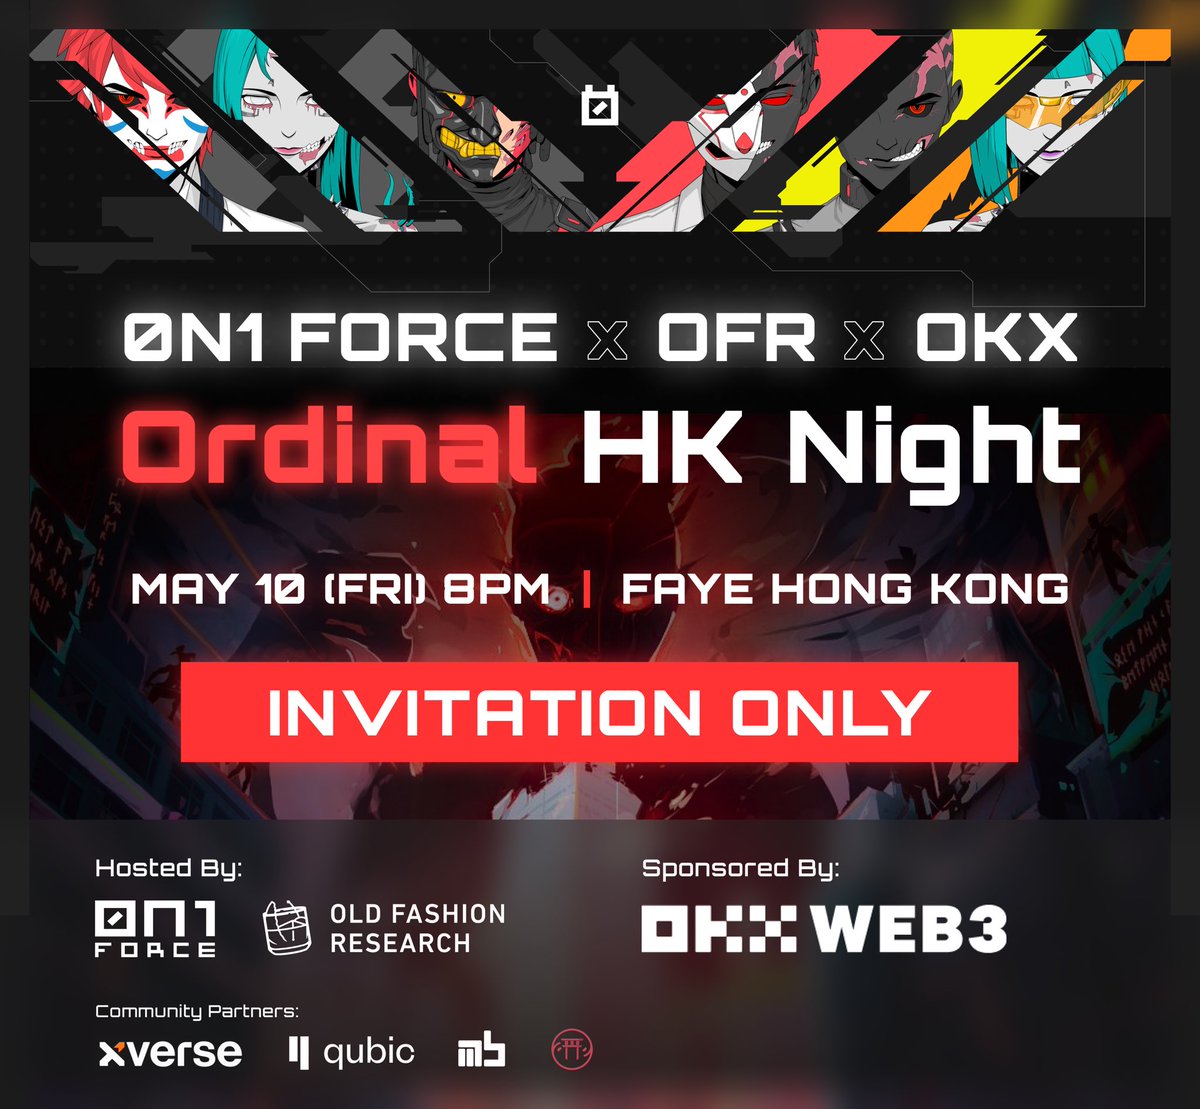 Join 0N1 Force x @OFRFund at 'Ordinal HK Night” in Hong Kong sponsored by @okxweb3 on May 10th! An exclusive evening where technology meets digital art, featuring community partners @XverseApp, @_Qubic_, @Monsterblockhk & @Azuki Secure your invitation now ↓